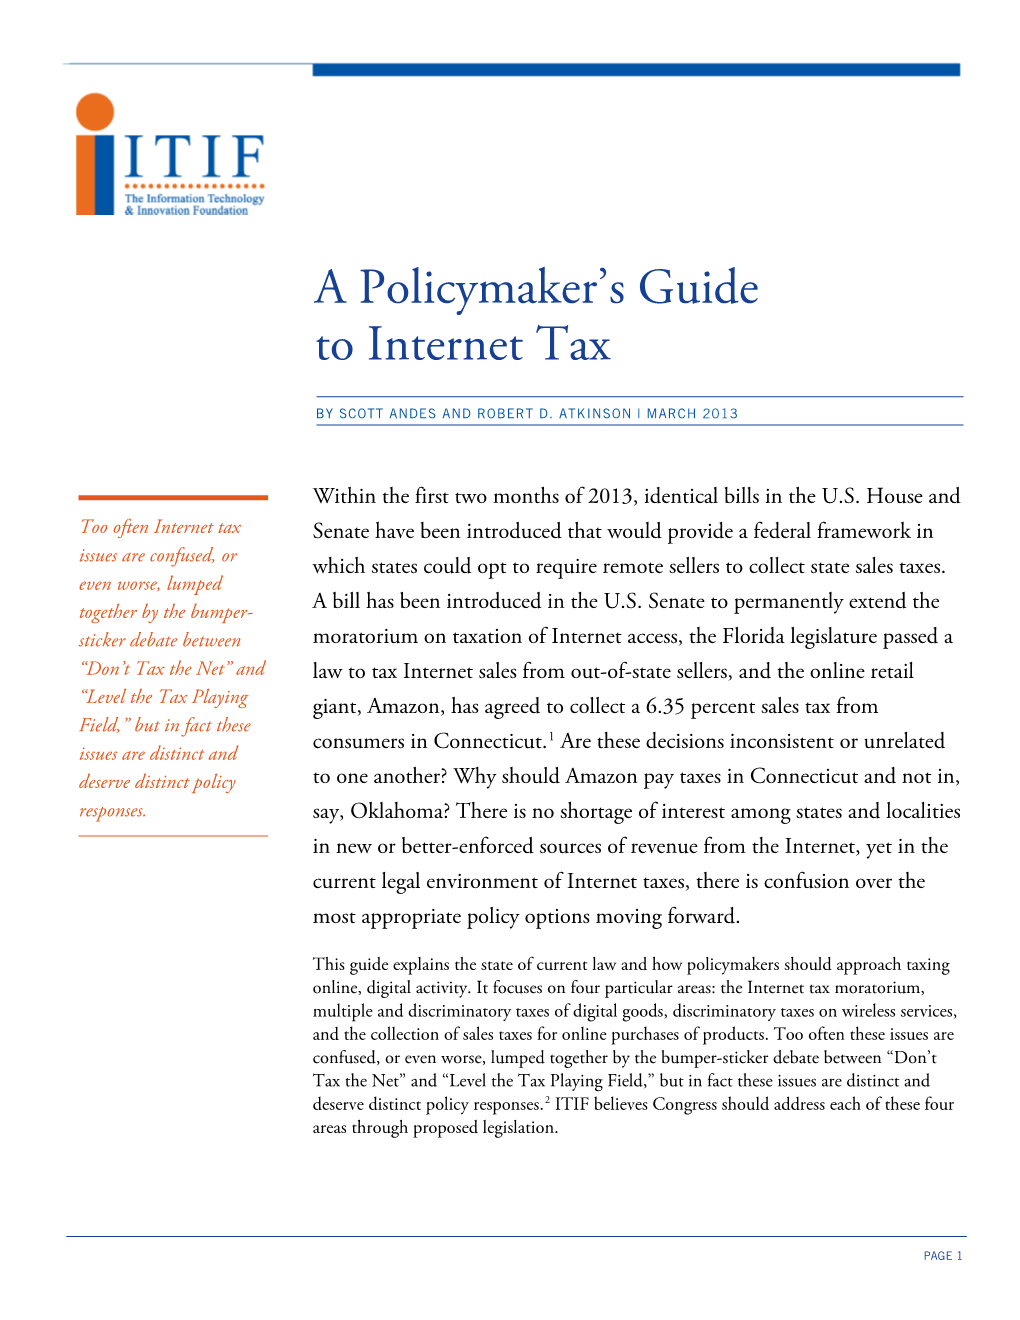 A Policymaker's Guide to Internet